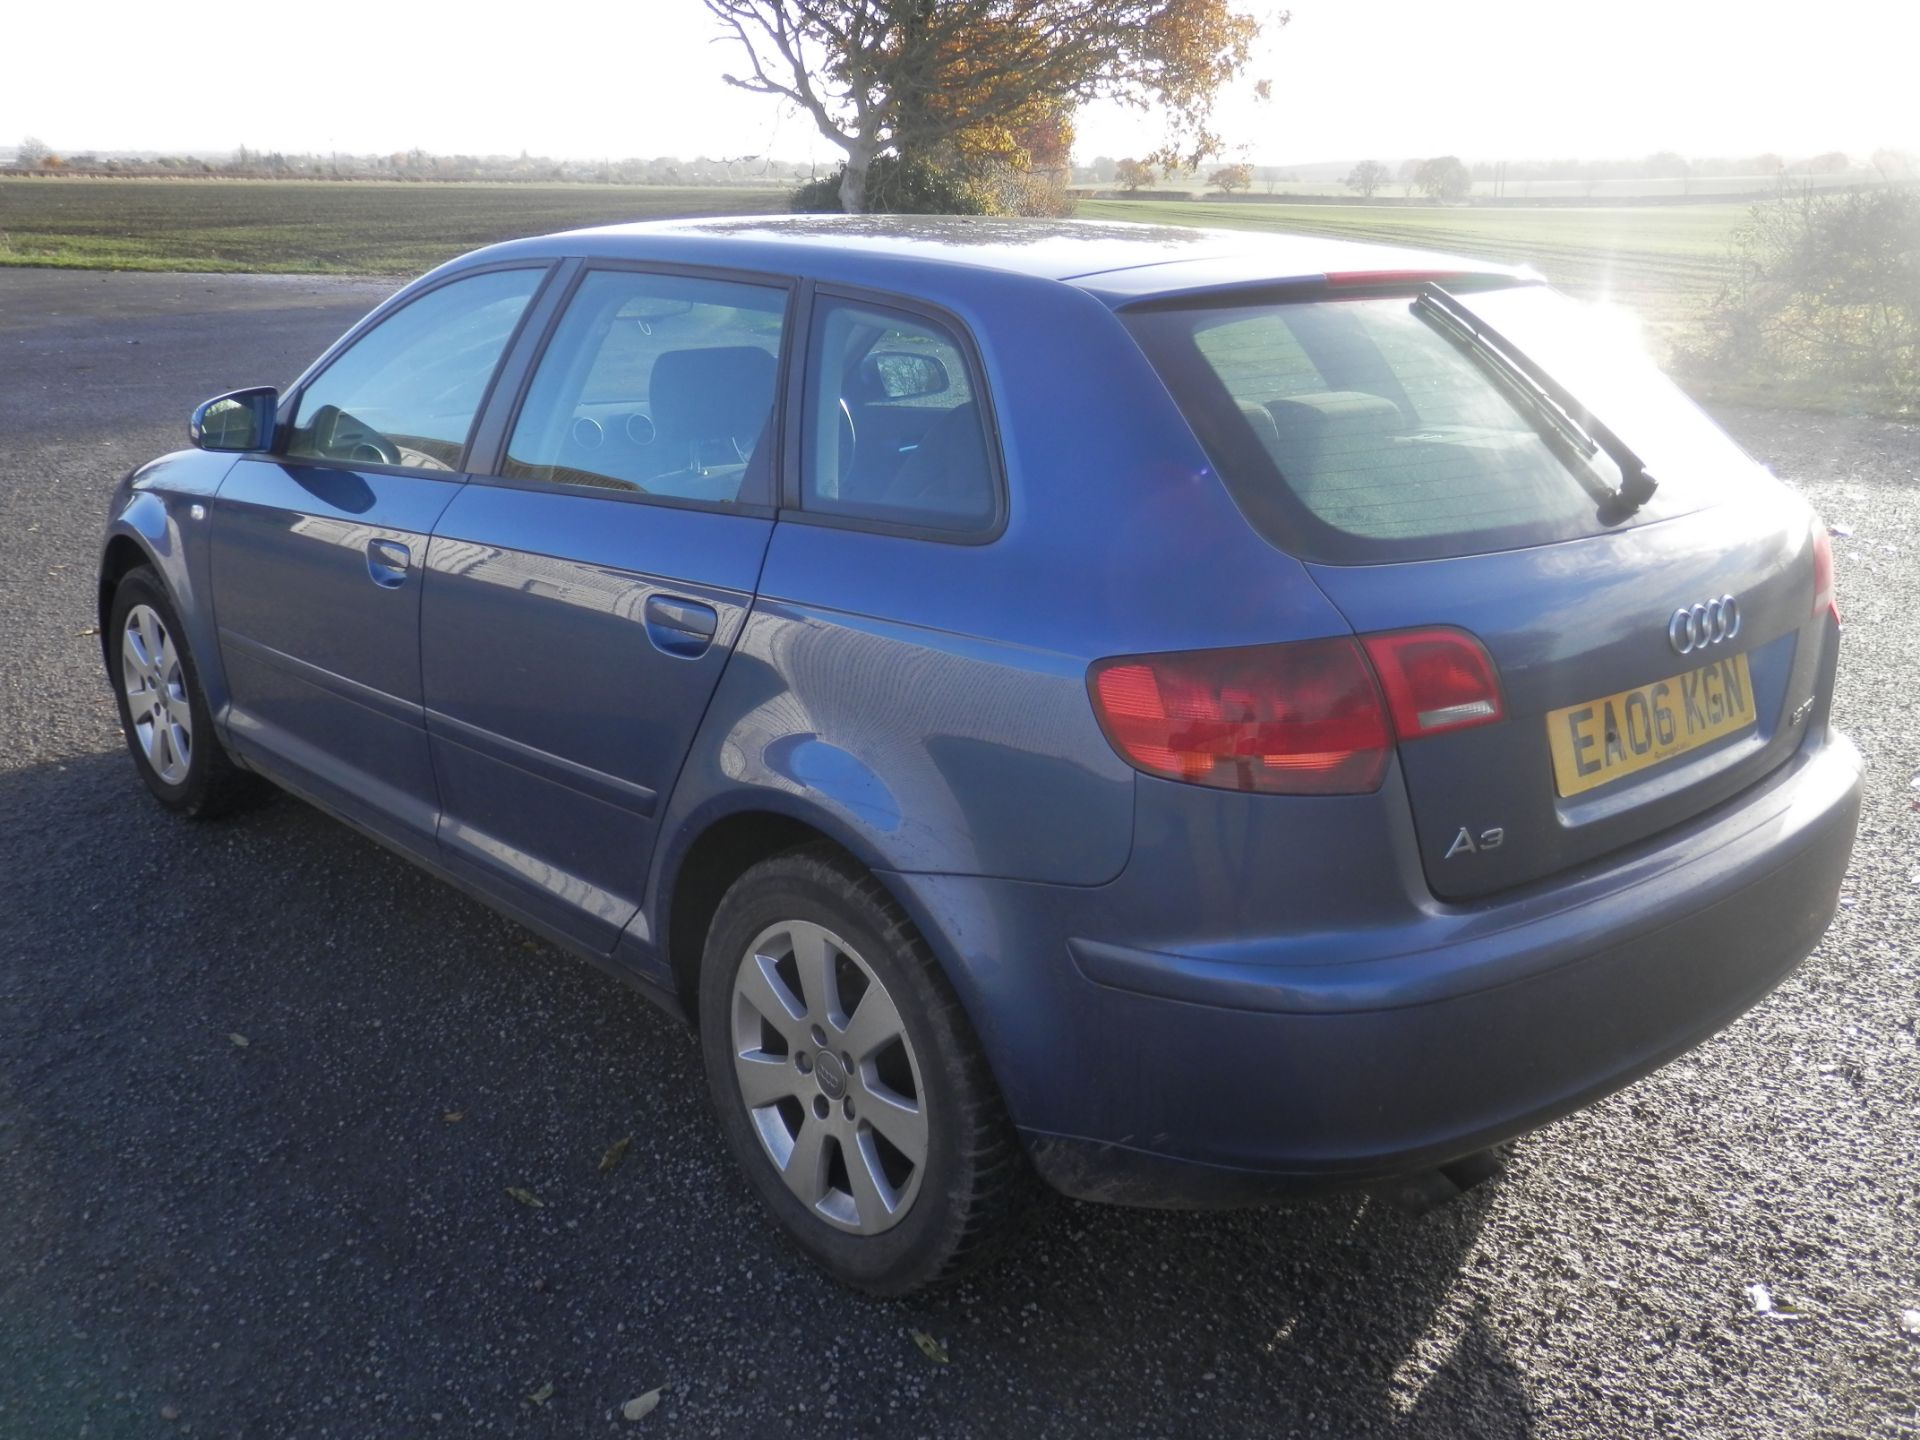 2006/06 AUDI A3 1.9 TDI, MOTFEB 2018, 170K MILES, HPI CLEAR. DRIVES VERY WELL. - Image 5 of 19